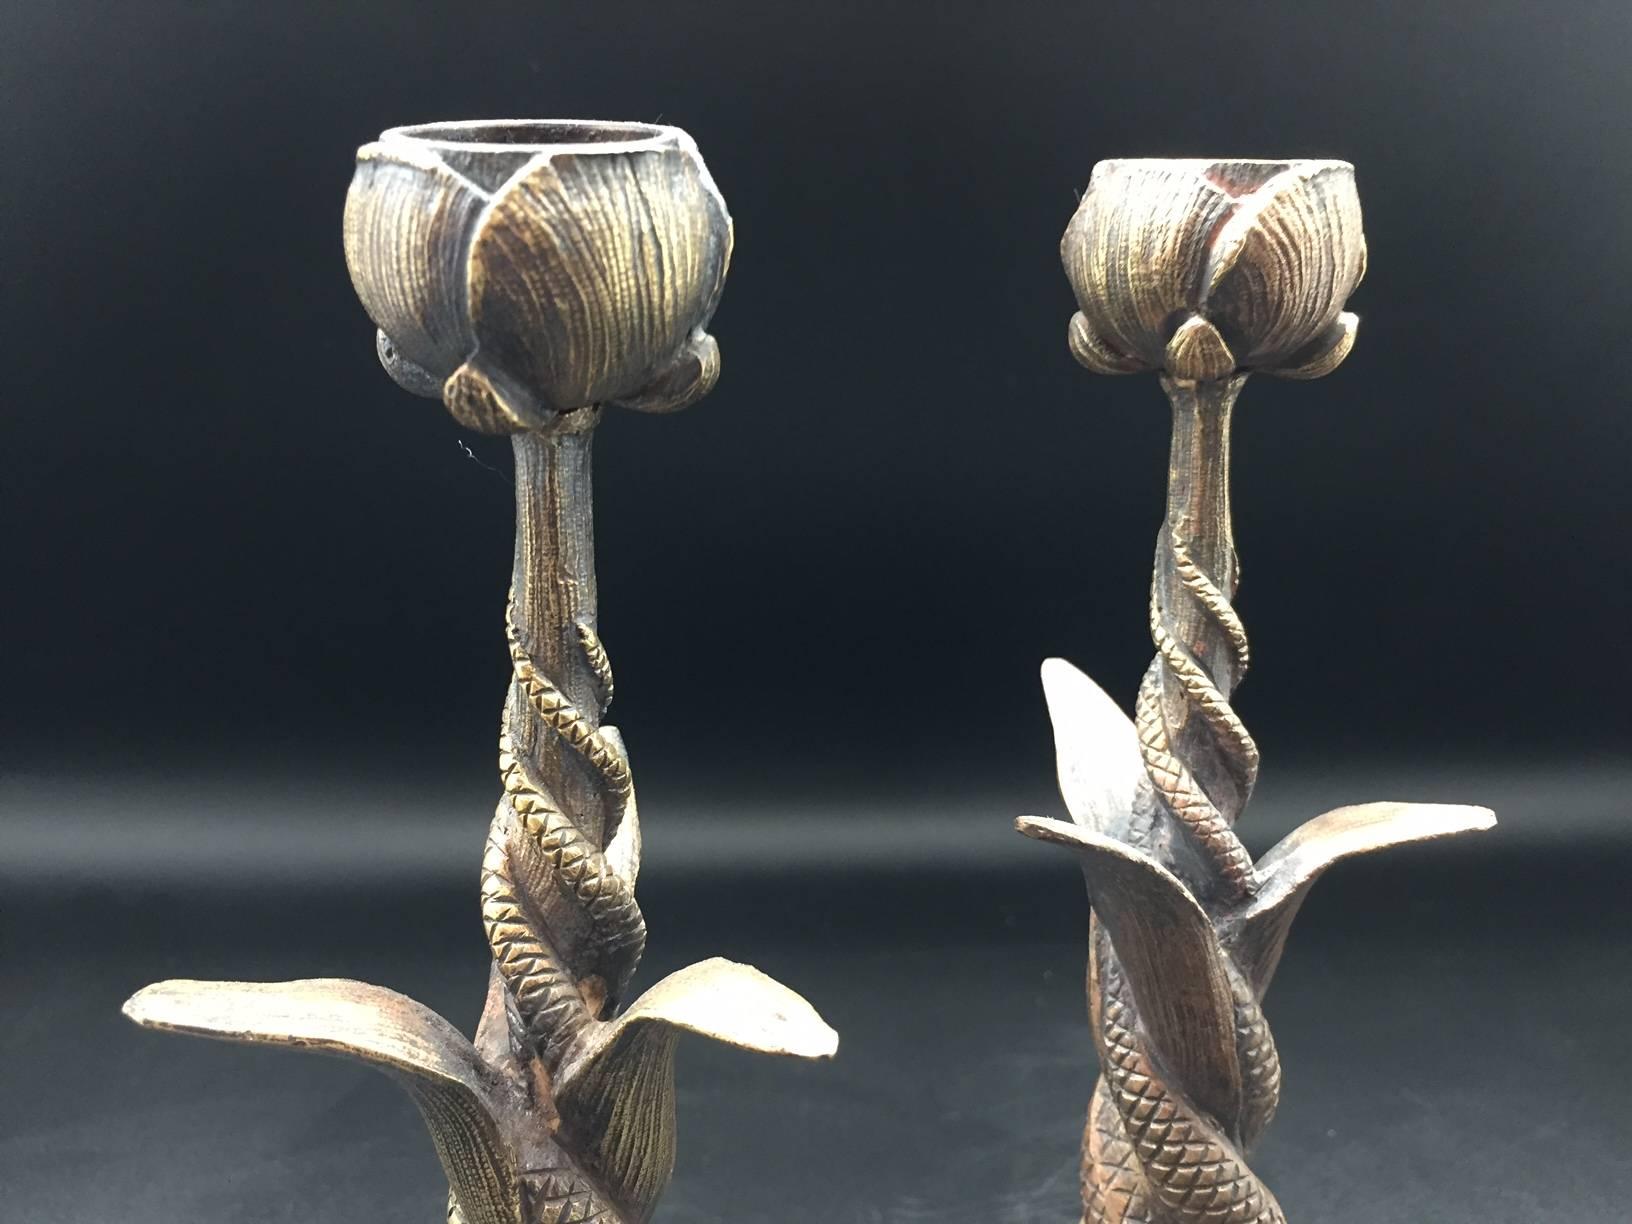 Pair of French Art Nouveau serpent and poppy flower bronze tripod candlesticks. The intertwined stylized poppy flower, leaves, and serpents are typical motifs from the Art Nouveau period, and possibly inspired by the Egyptian iconography of that